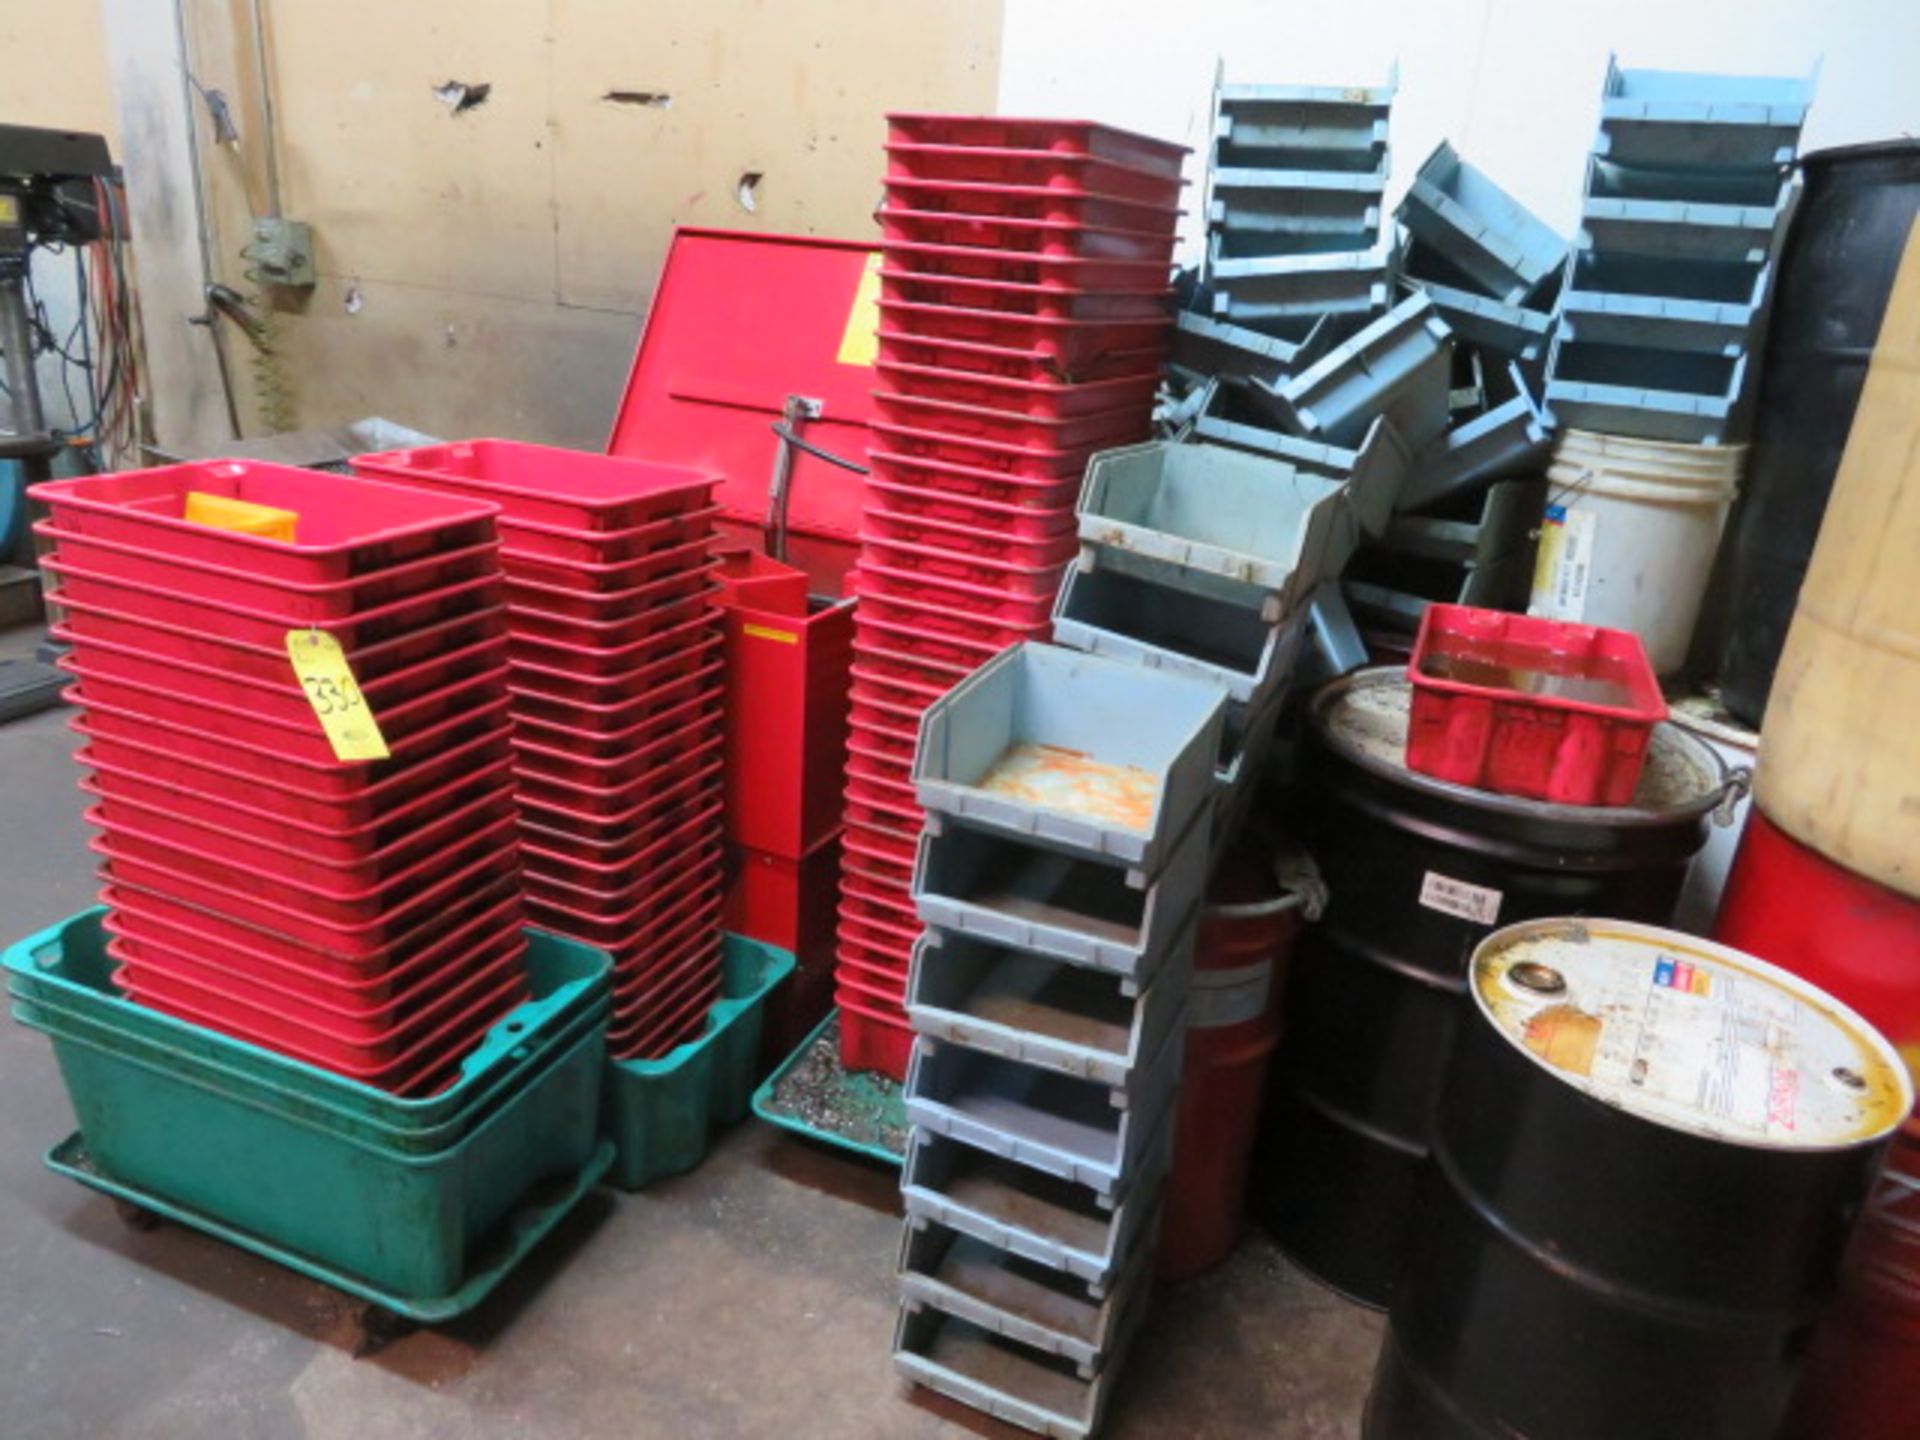 ASSORTED PLASTIC TOTES AND AKRO BINS